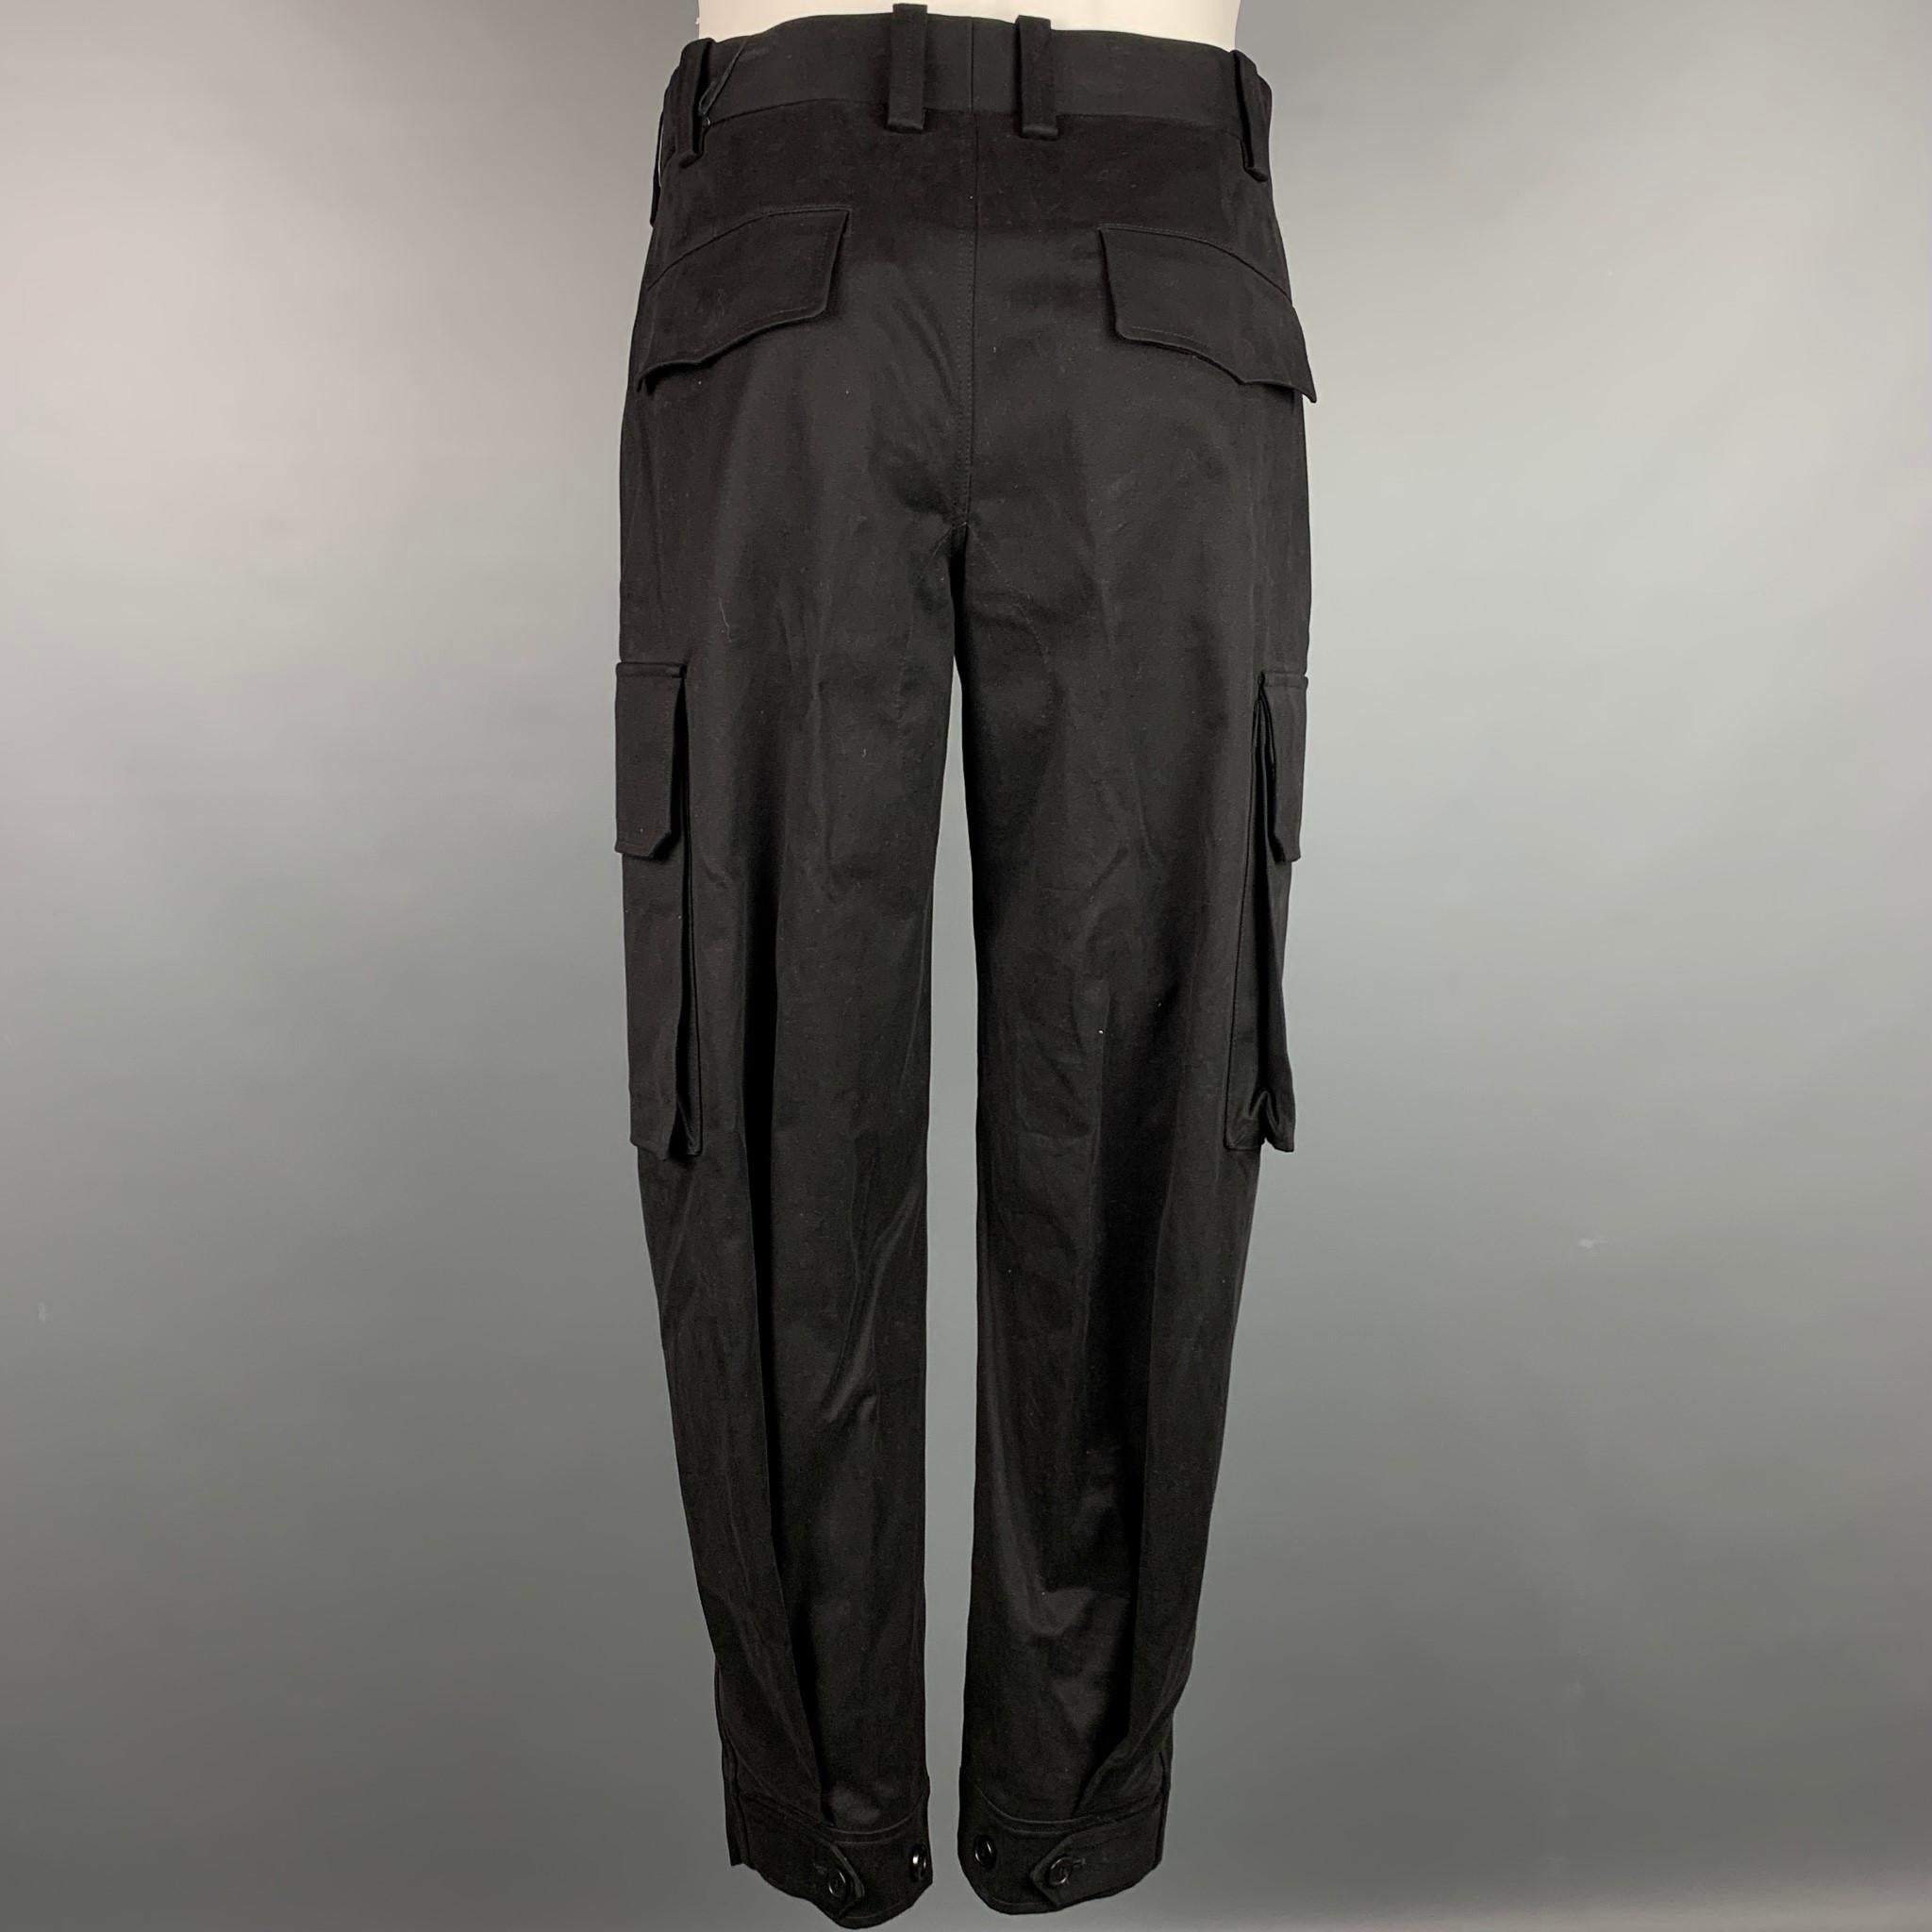 NEIL BARRETT casual pants comes in a black cotton featuring a cargo style, patch pockets, and a zip fly closure. Made in Italy. 

New With Tags. 
Marked: 46
Original Retail Price: $647.00

Measurements:

Waist: 32 in.
Rise: 12 in.
Inseam: 28 in. 